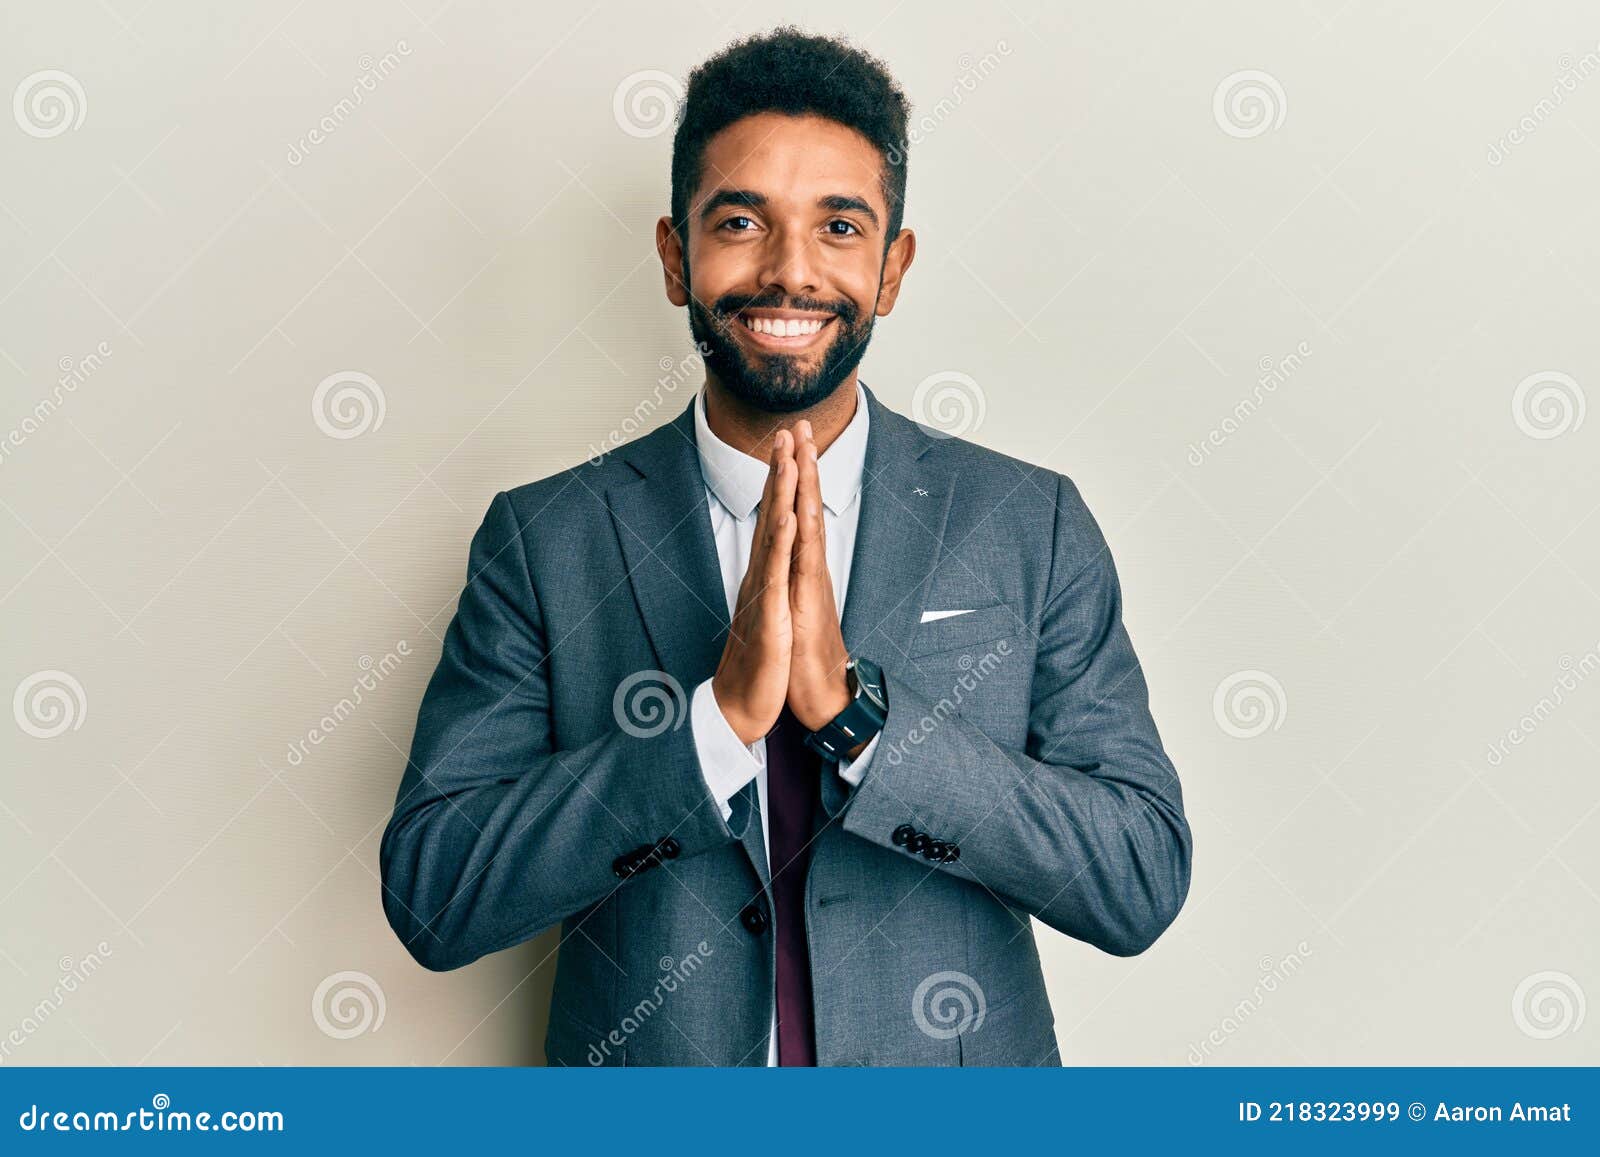 Handsome Hispanic Man with Beard Wearing Business Suit and Tie Praying ...